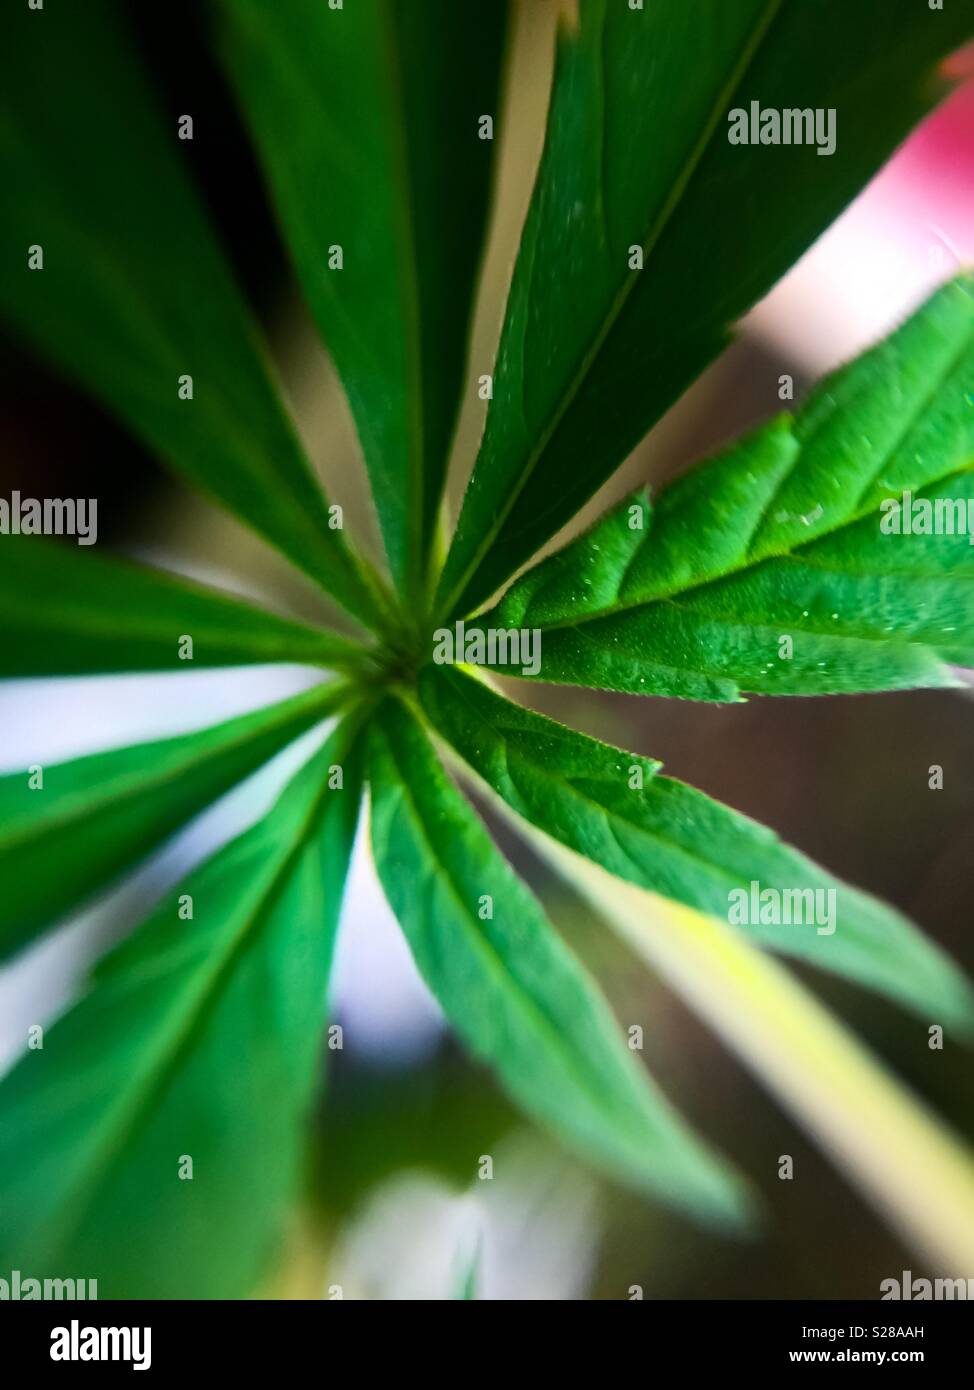 Bump Of Marijuana On The Scales,weighing And Sale Cannabis Buds,drug  Trafficking Close-up Stock Photo, Picture and Royalty Free Image. Image  129322798.